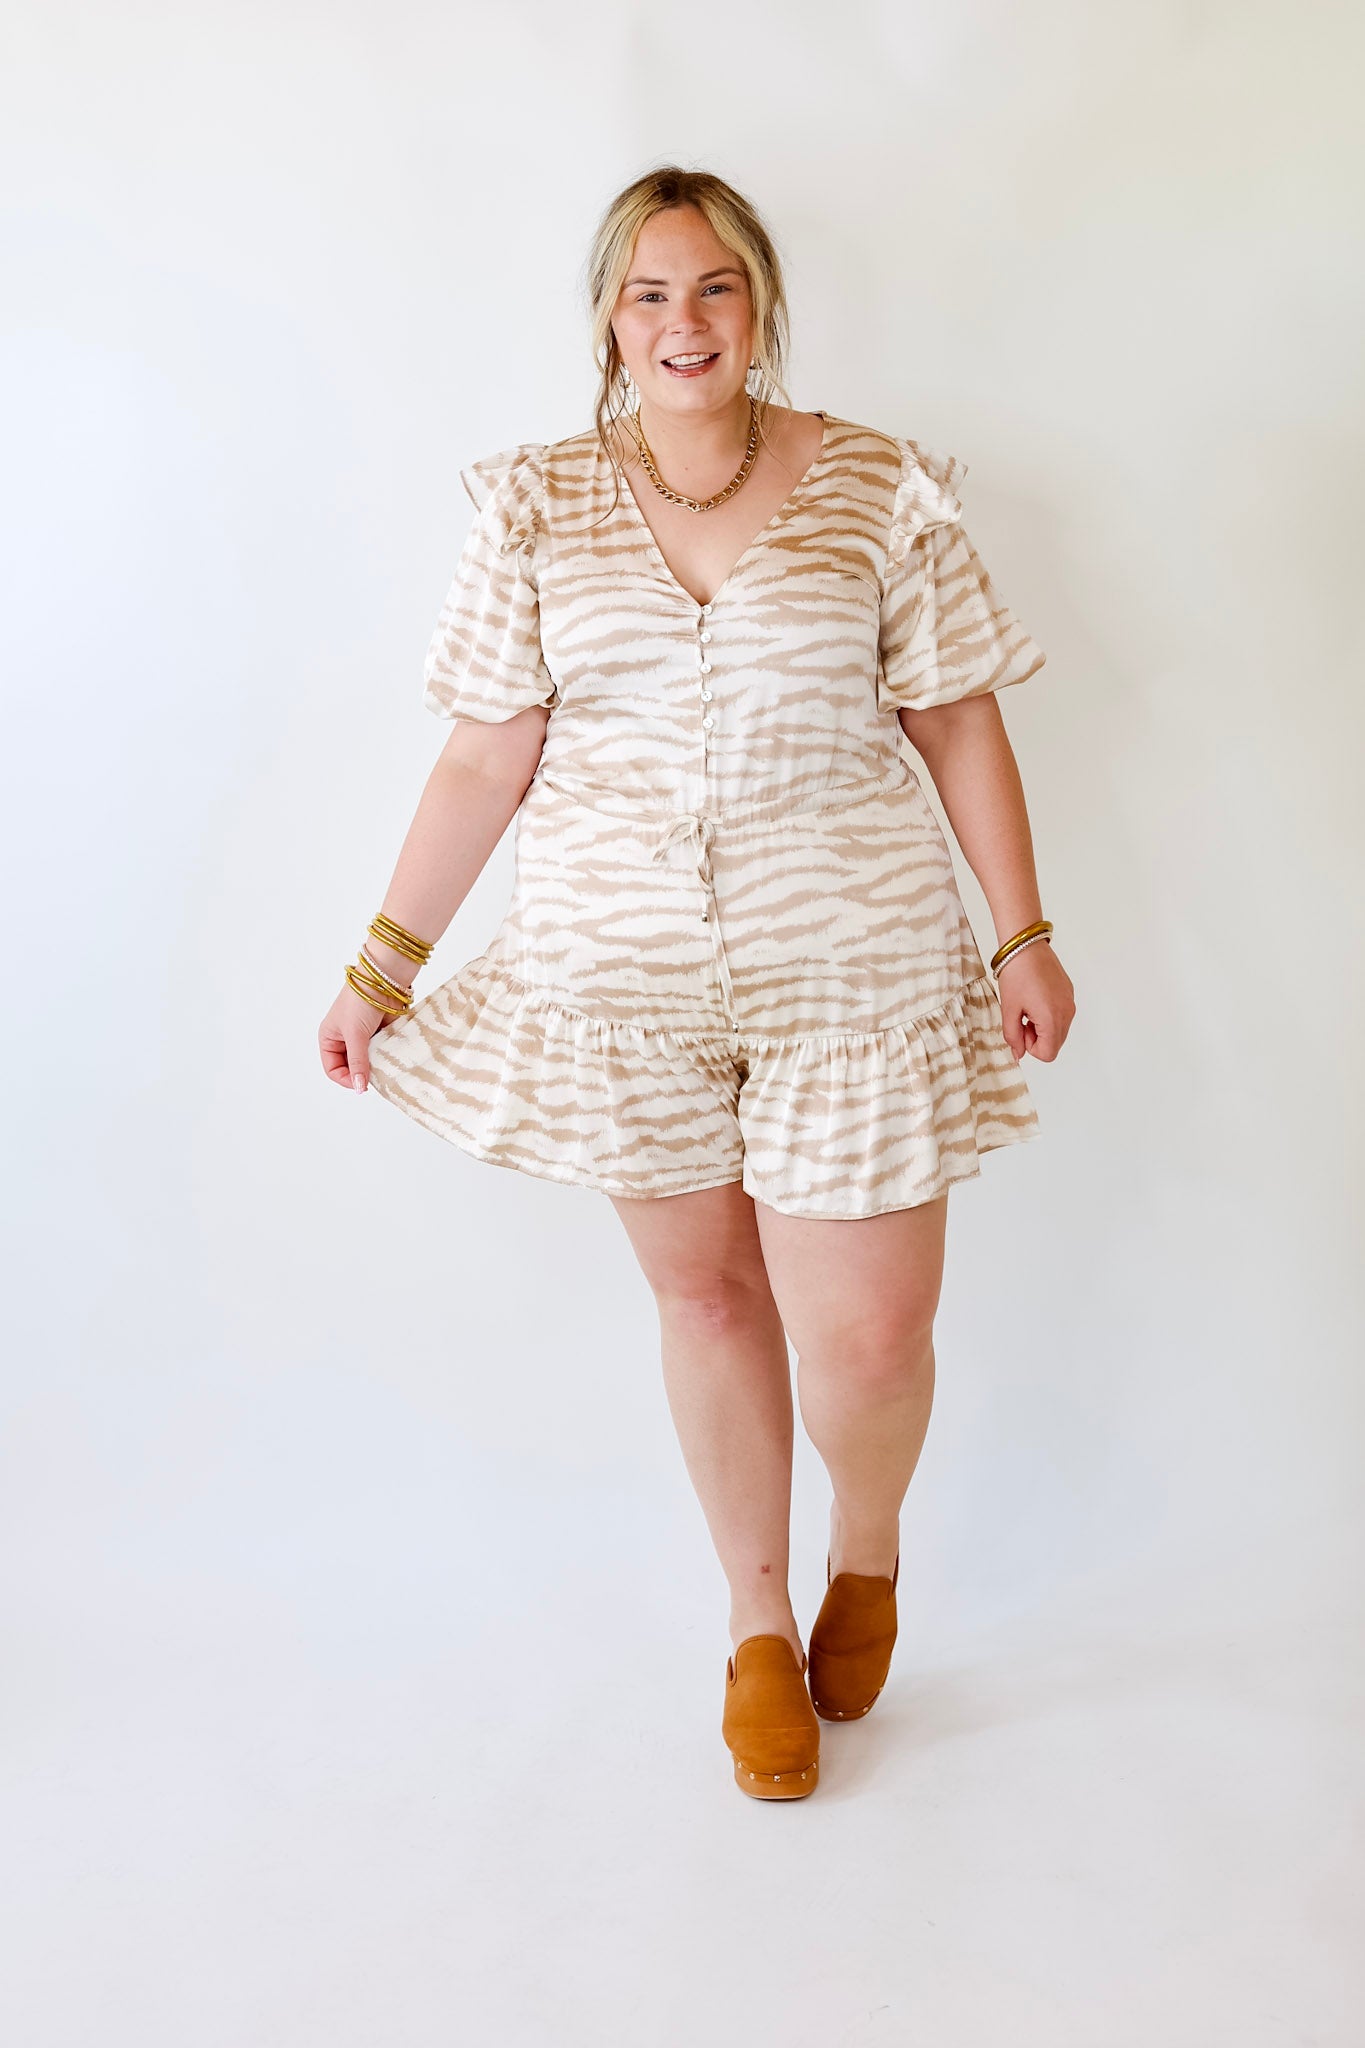 Head Turner Animal Print Romper in Beige and Cream - Giddy Up Glamour Boutique